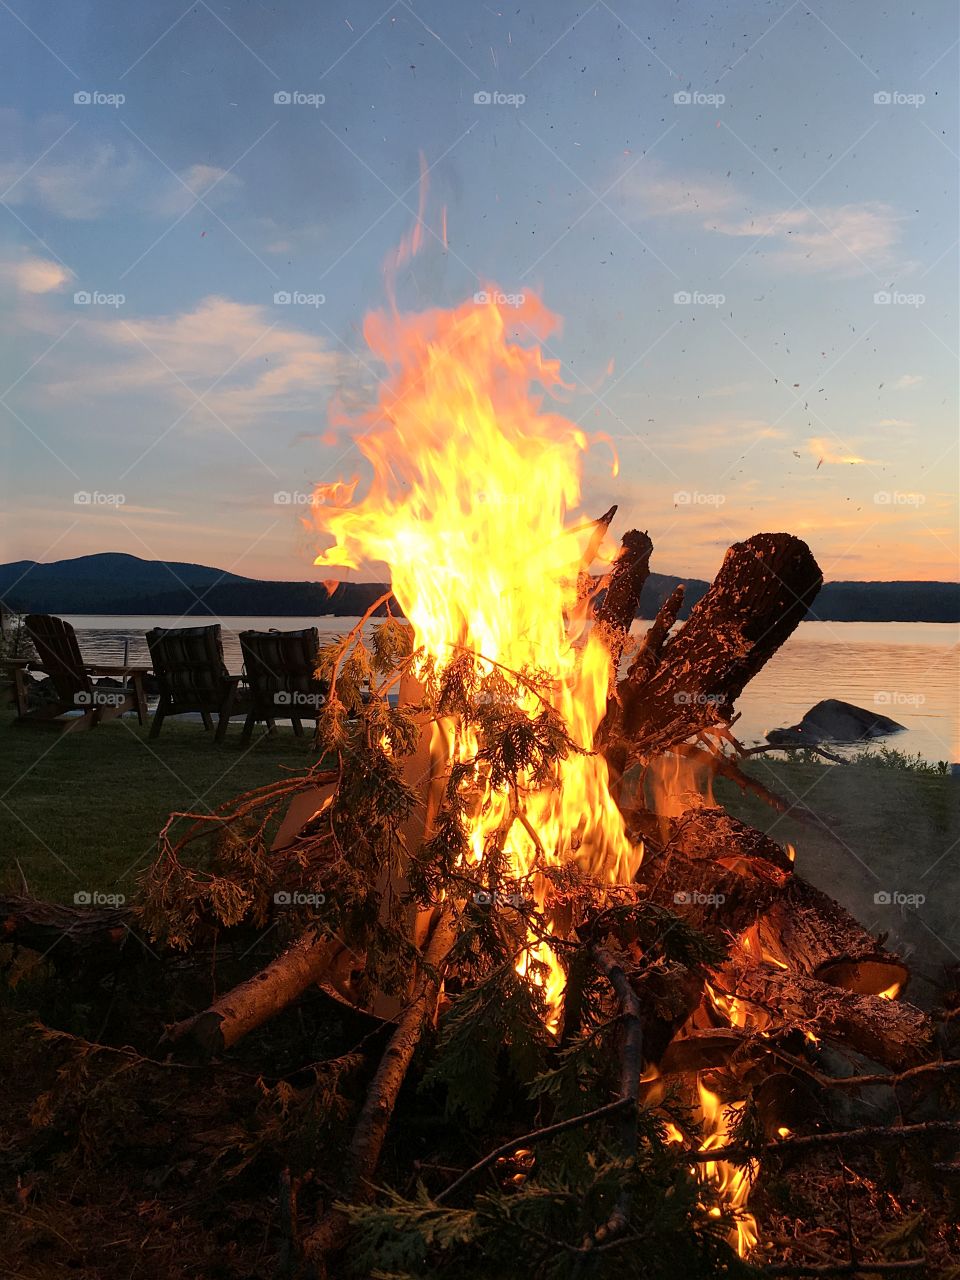 Bonfire at the lake in the Adirondack mountains